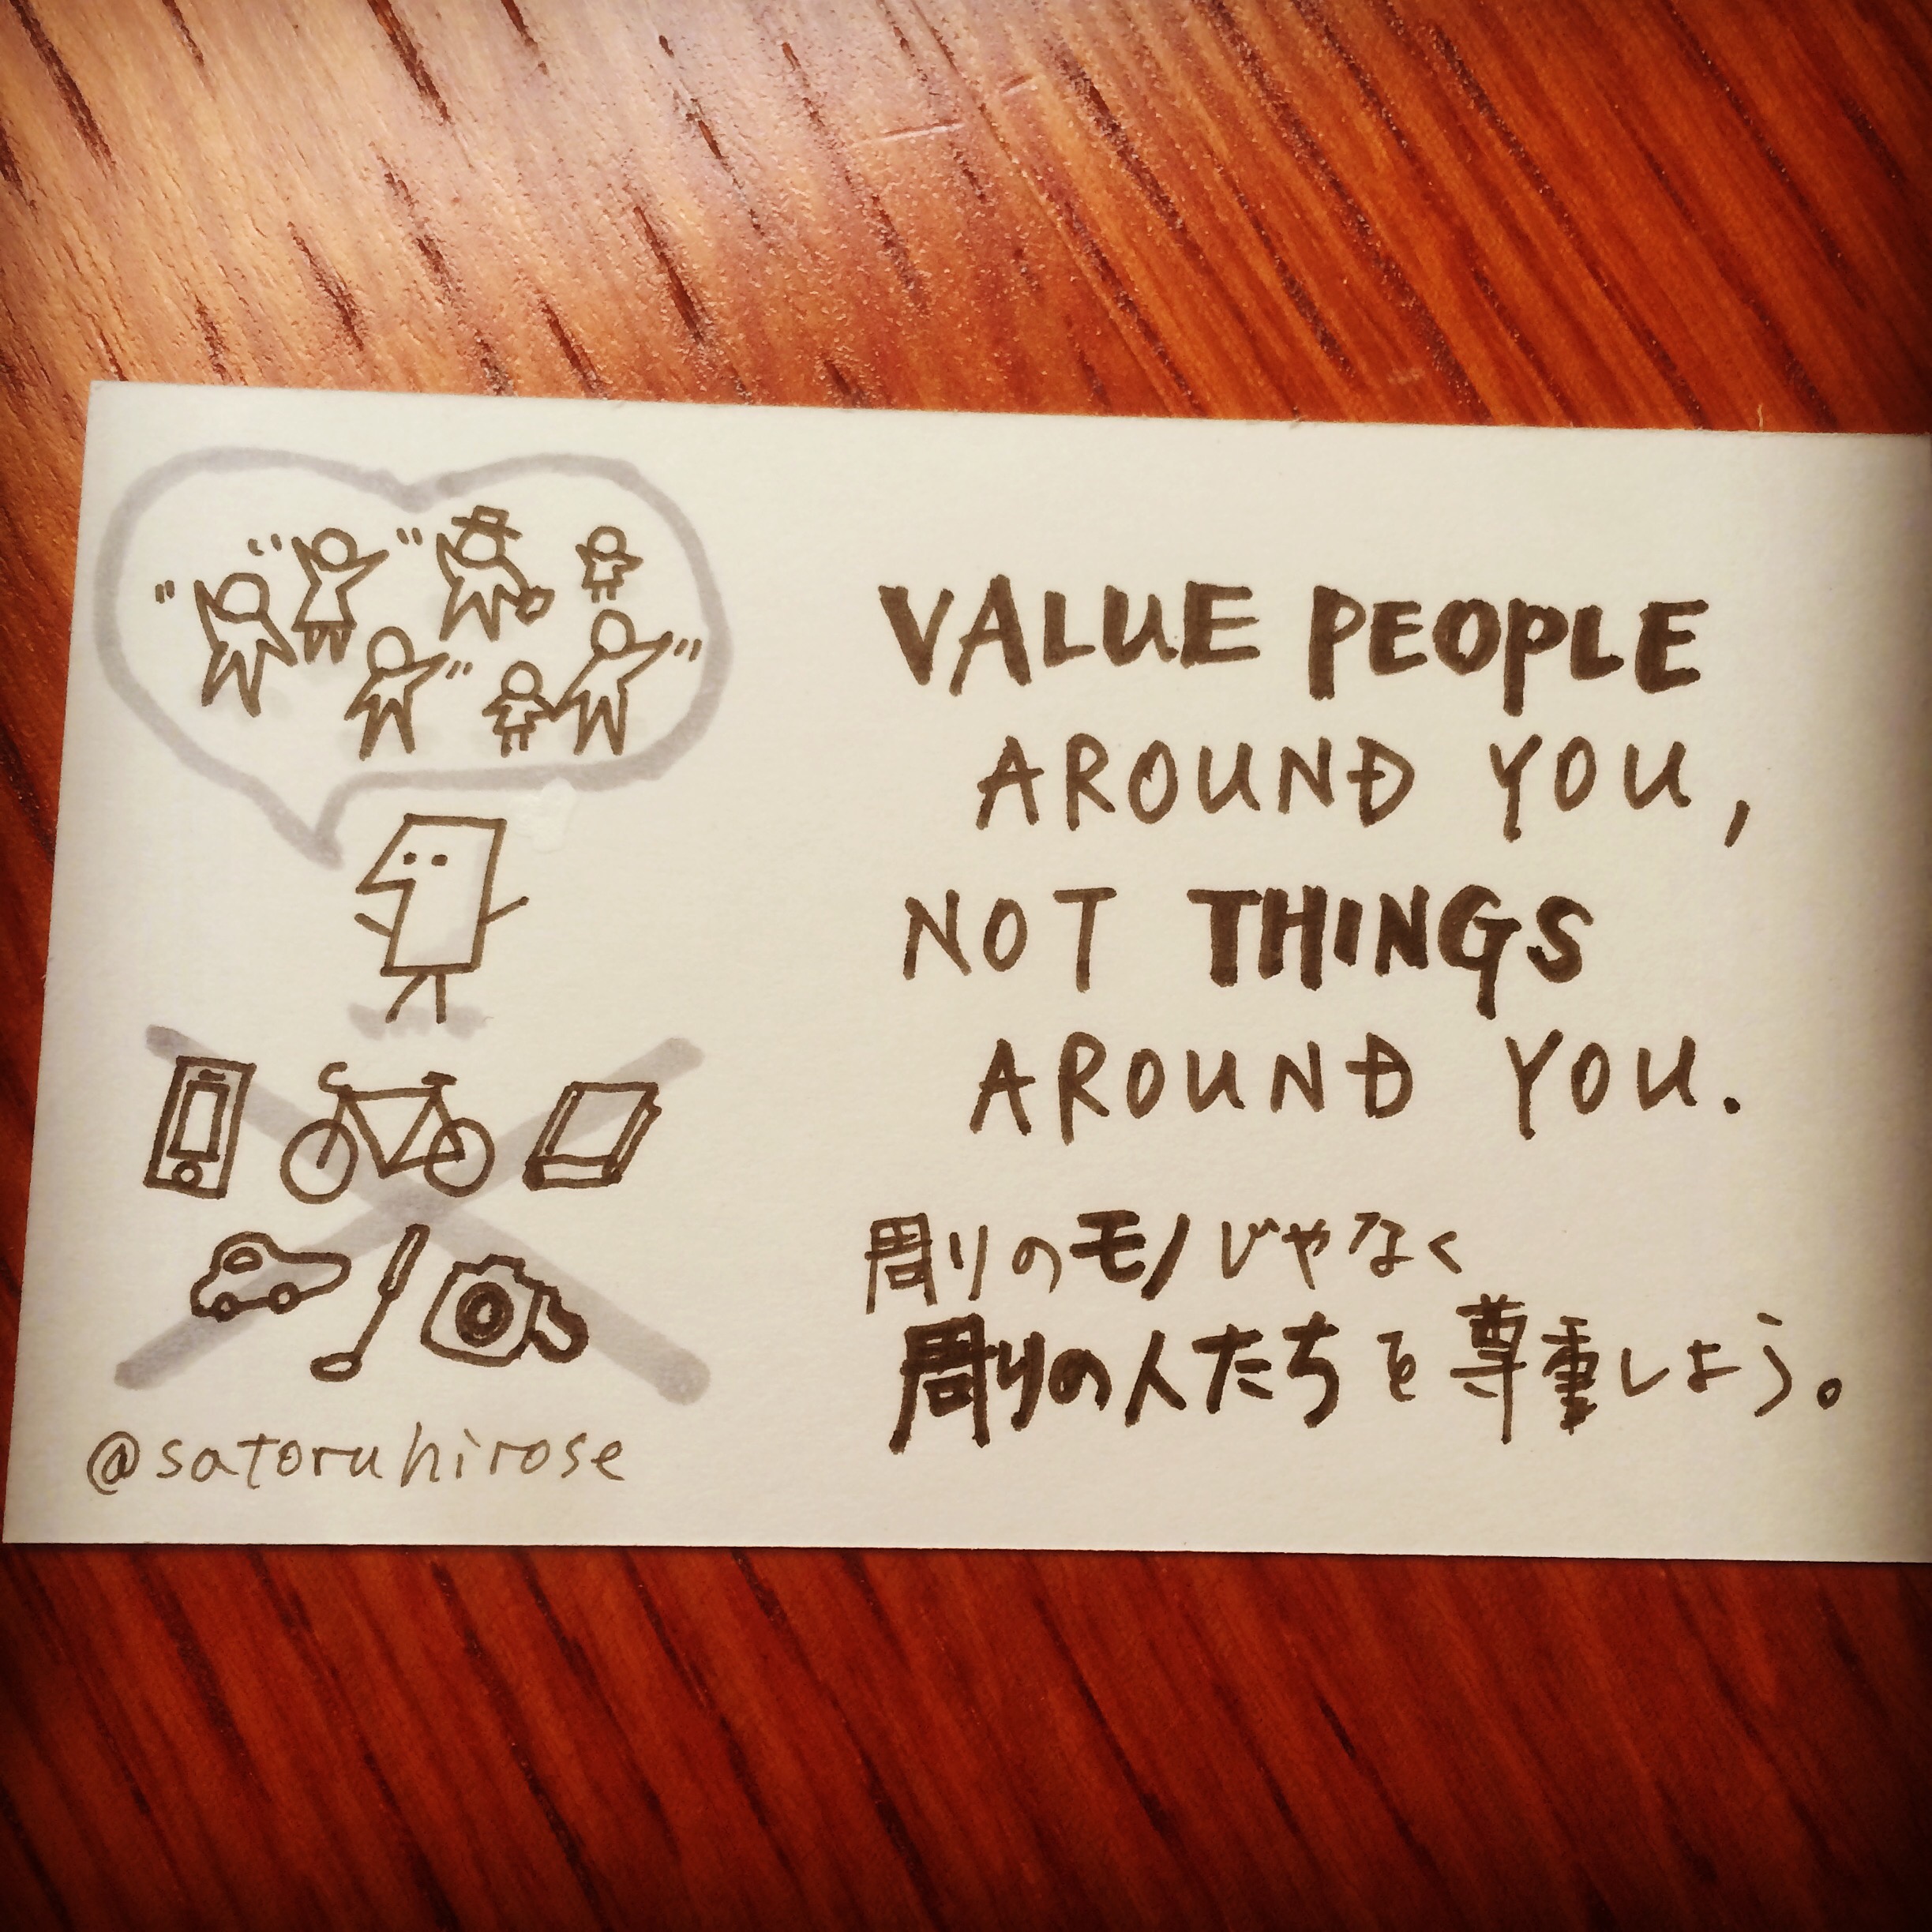 Value people around you, not things around you.